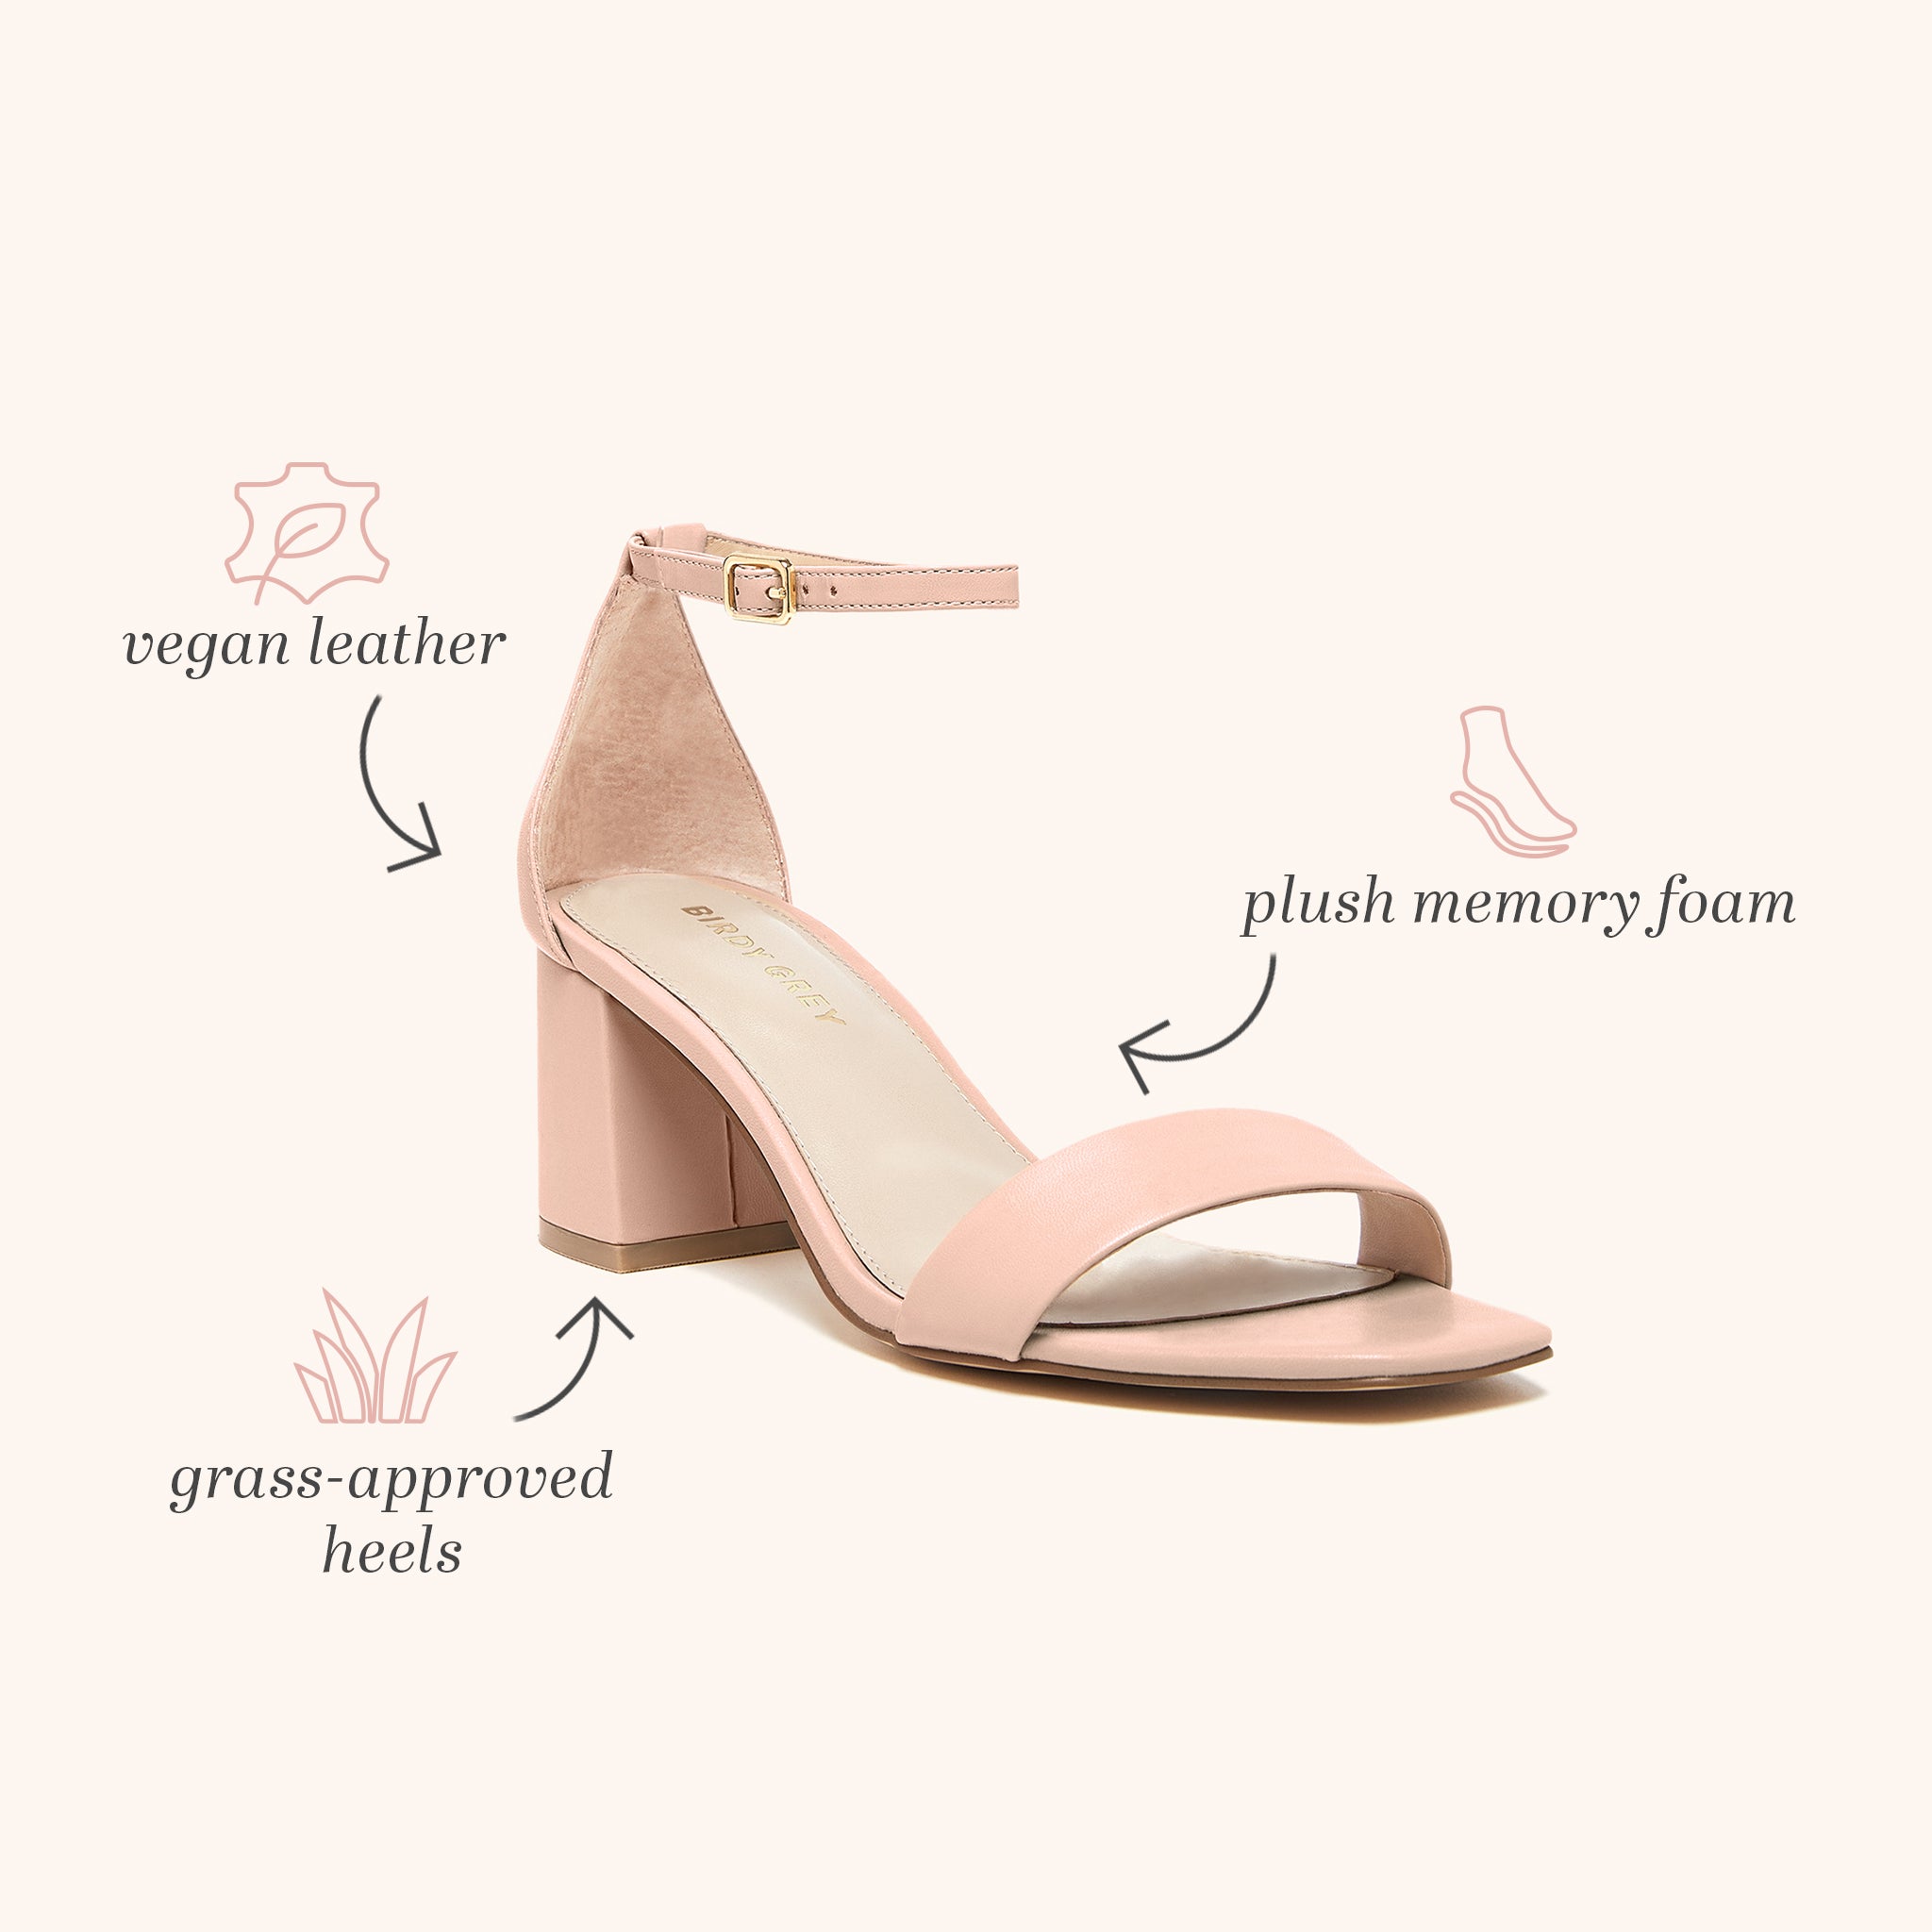 Wedding Shoes 101: 10 Stunning Styles of Shoes to Consider For